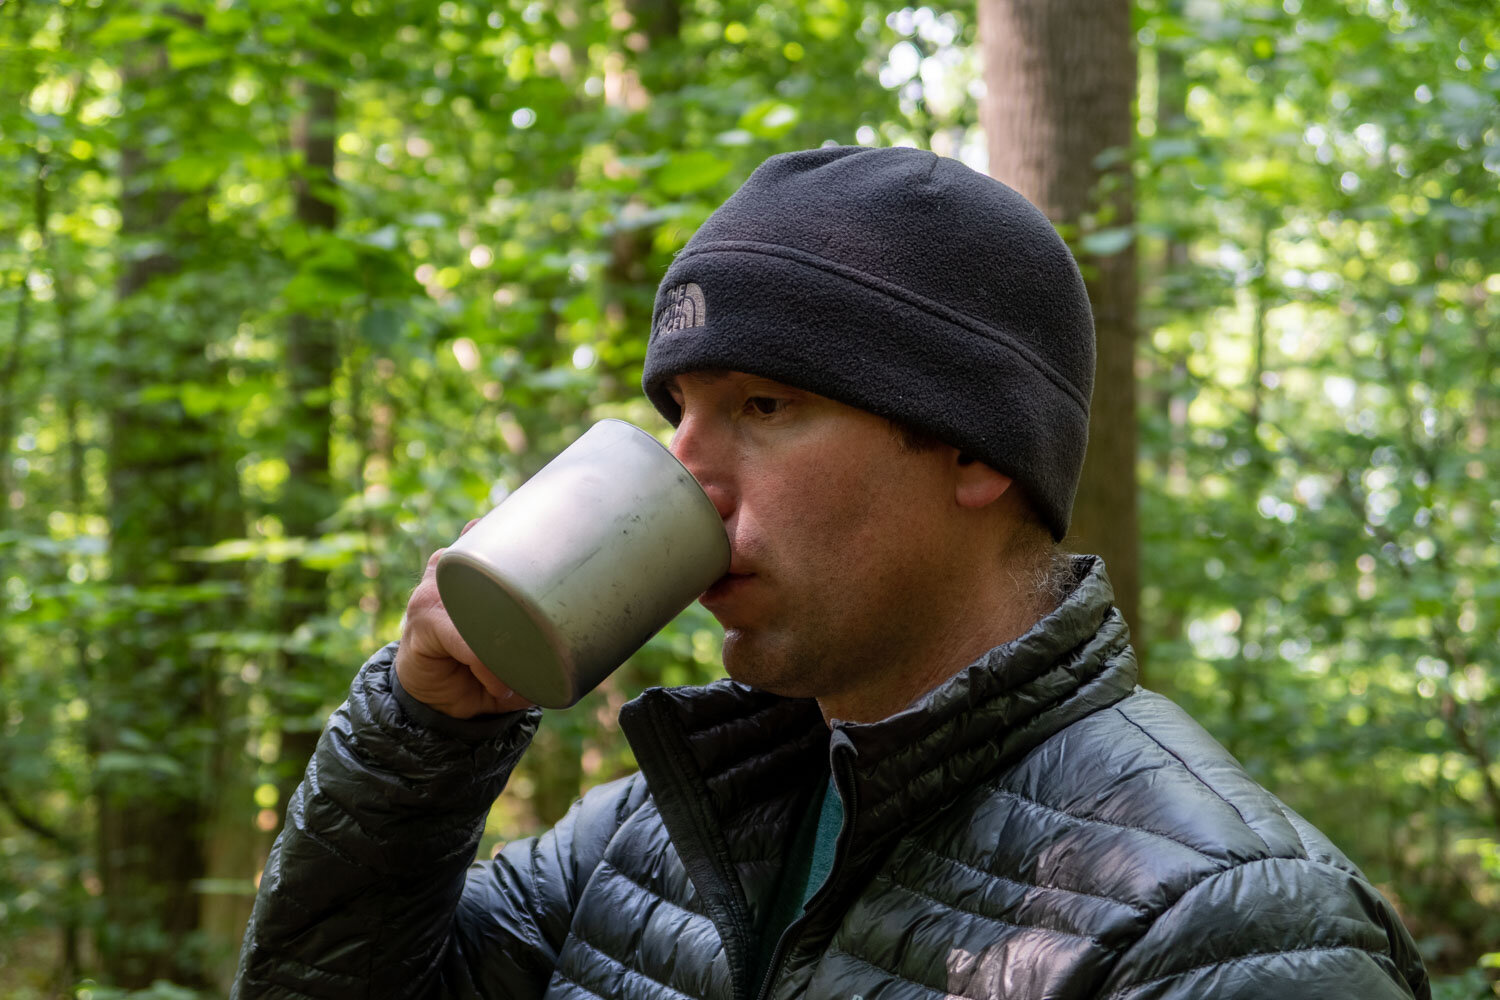 Backpackers: This Is the Only Coffee Mug You Need